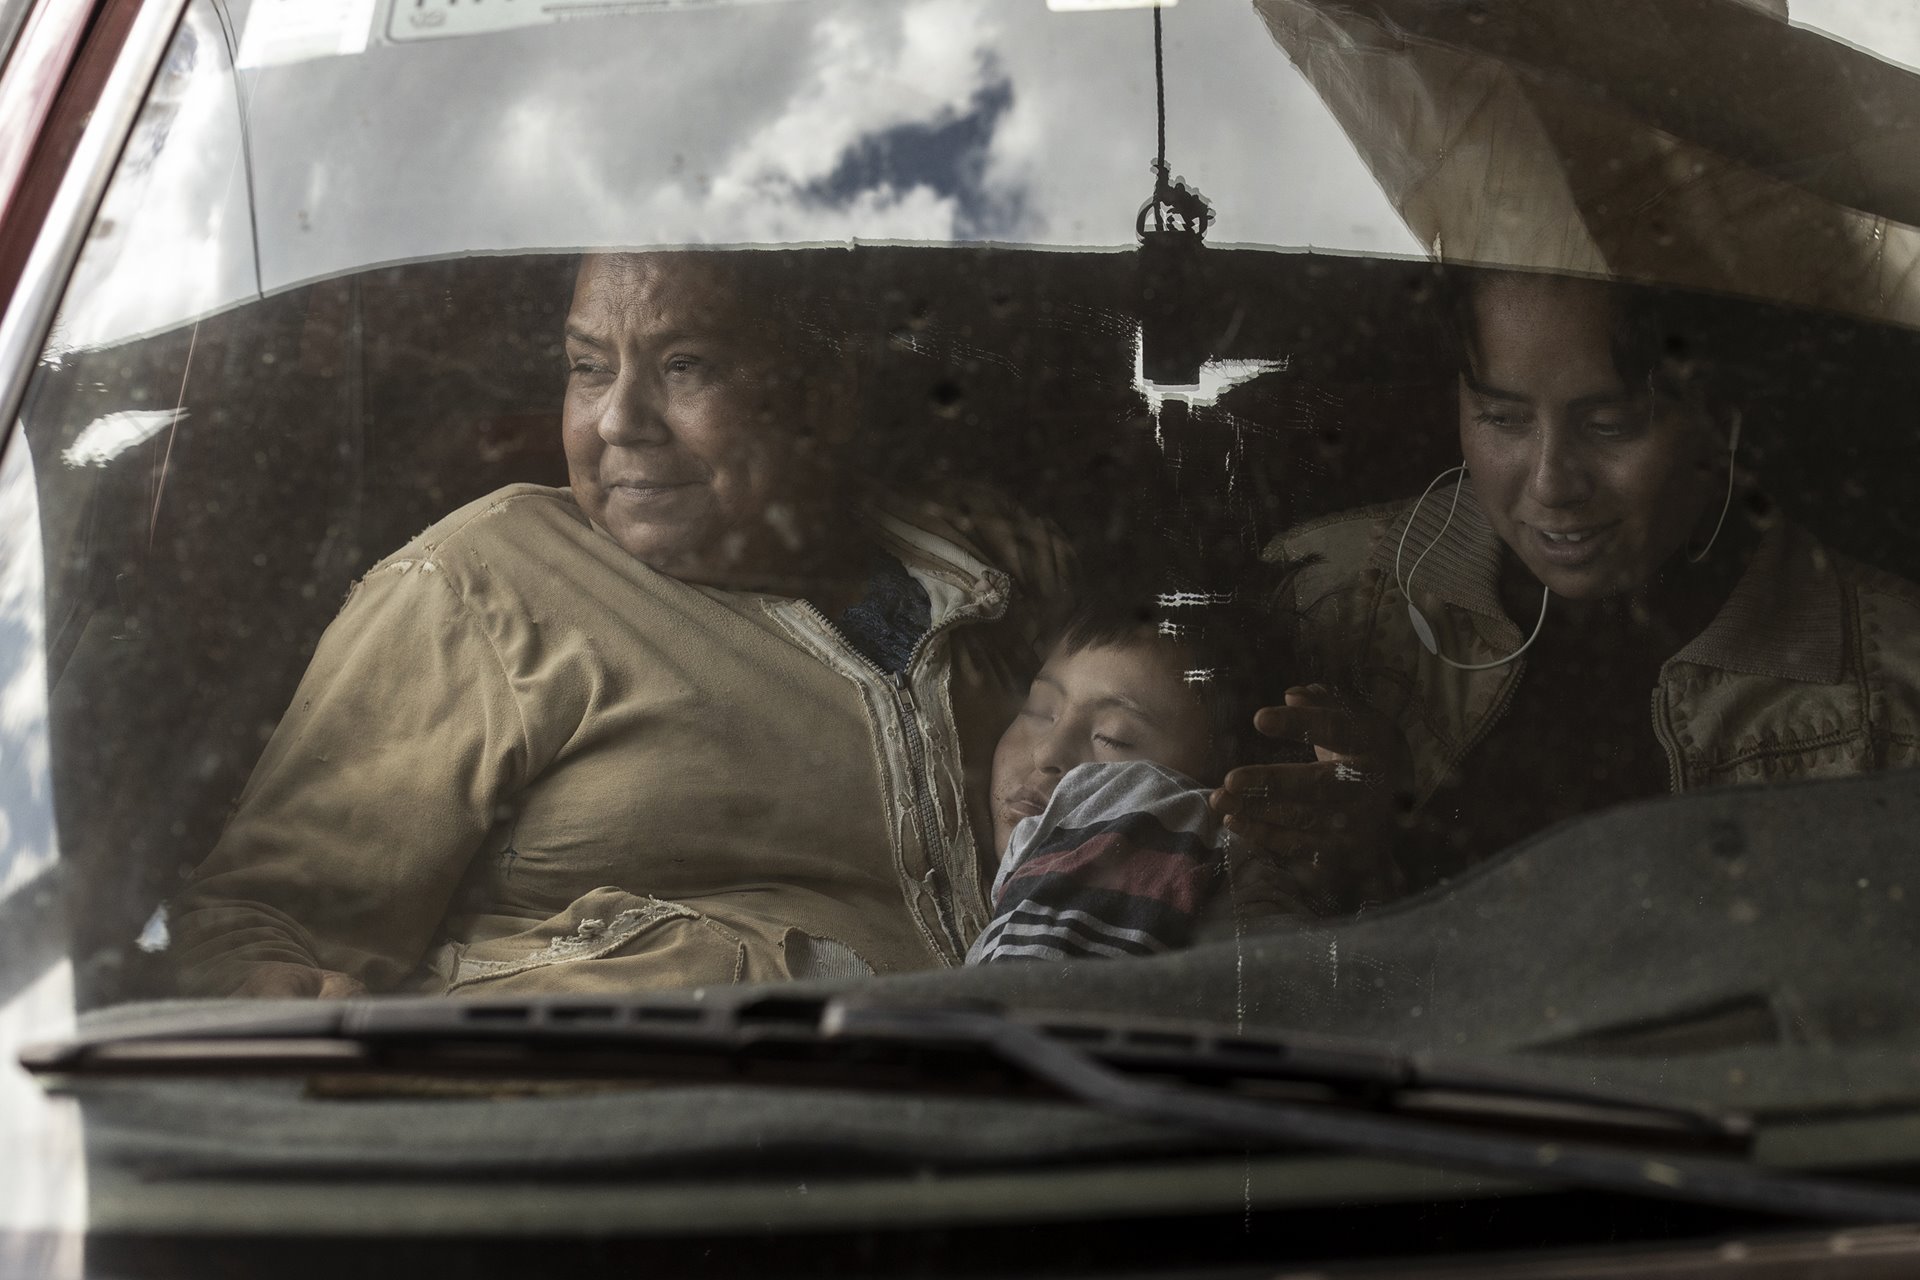 Celerina sits inside the family truck with her children, Gael, who lives with Down syndrome, and Monserrat, after returning from work. Monserrat helps her mother in the fields, but wants to study for a degree and find employment away from the flower industry.